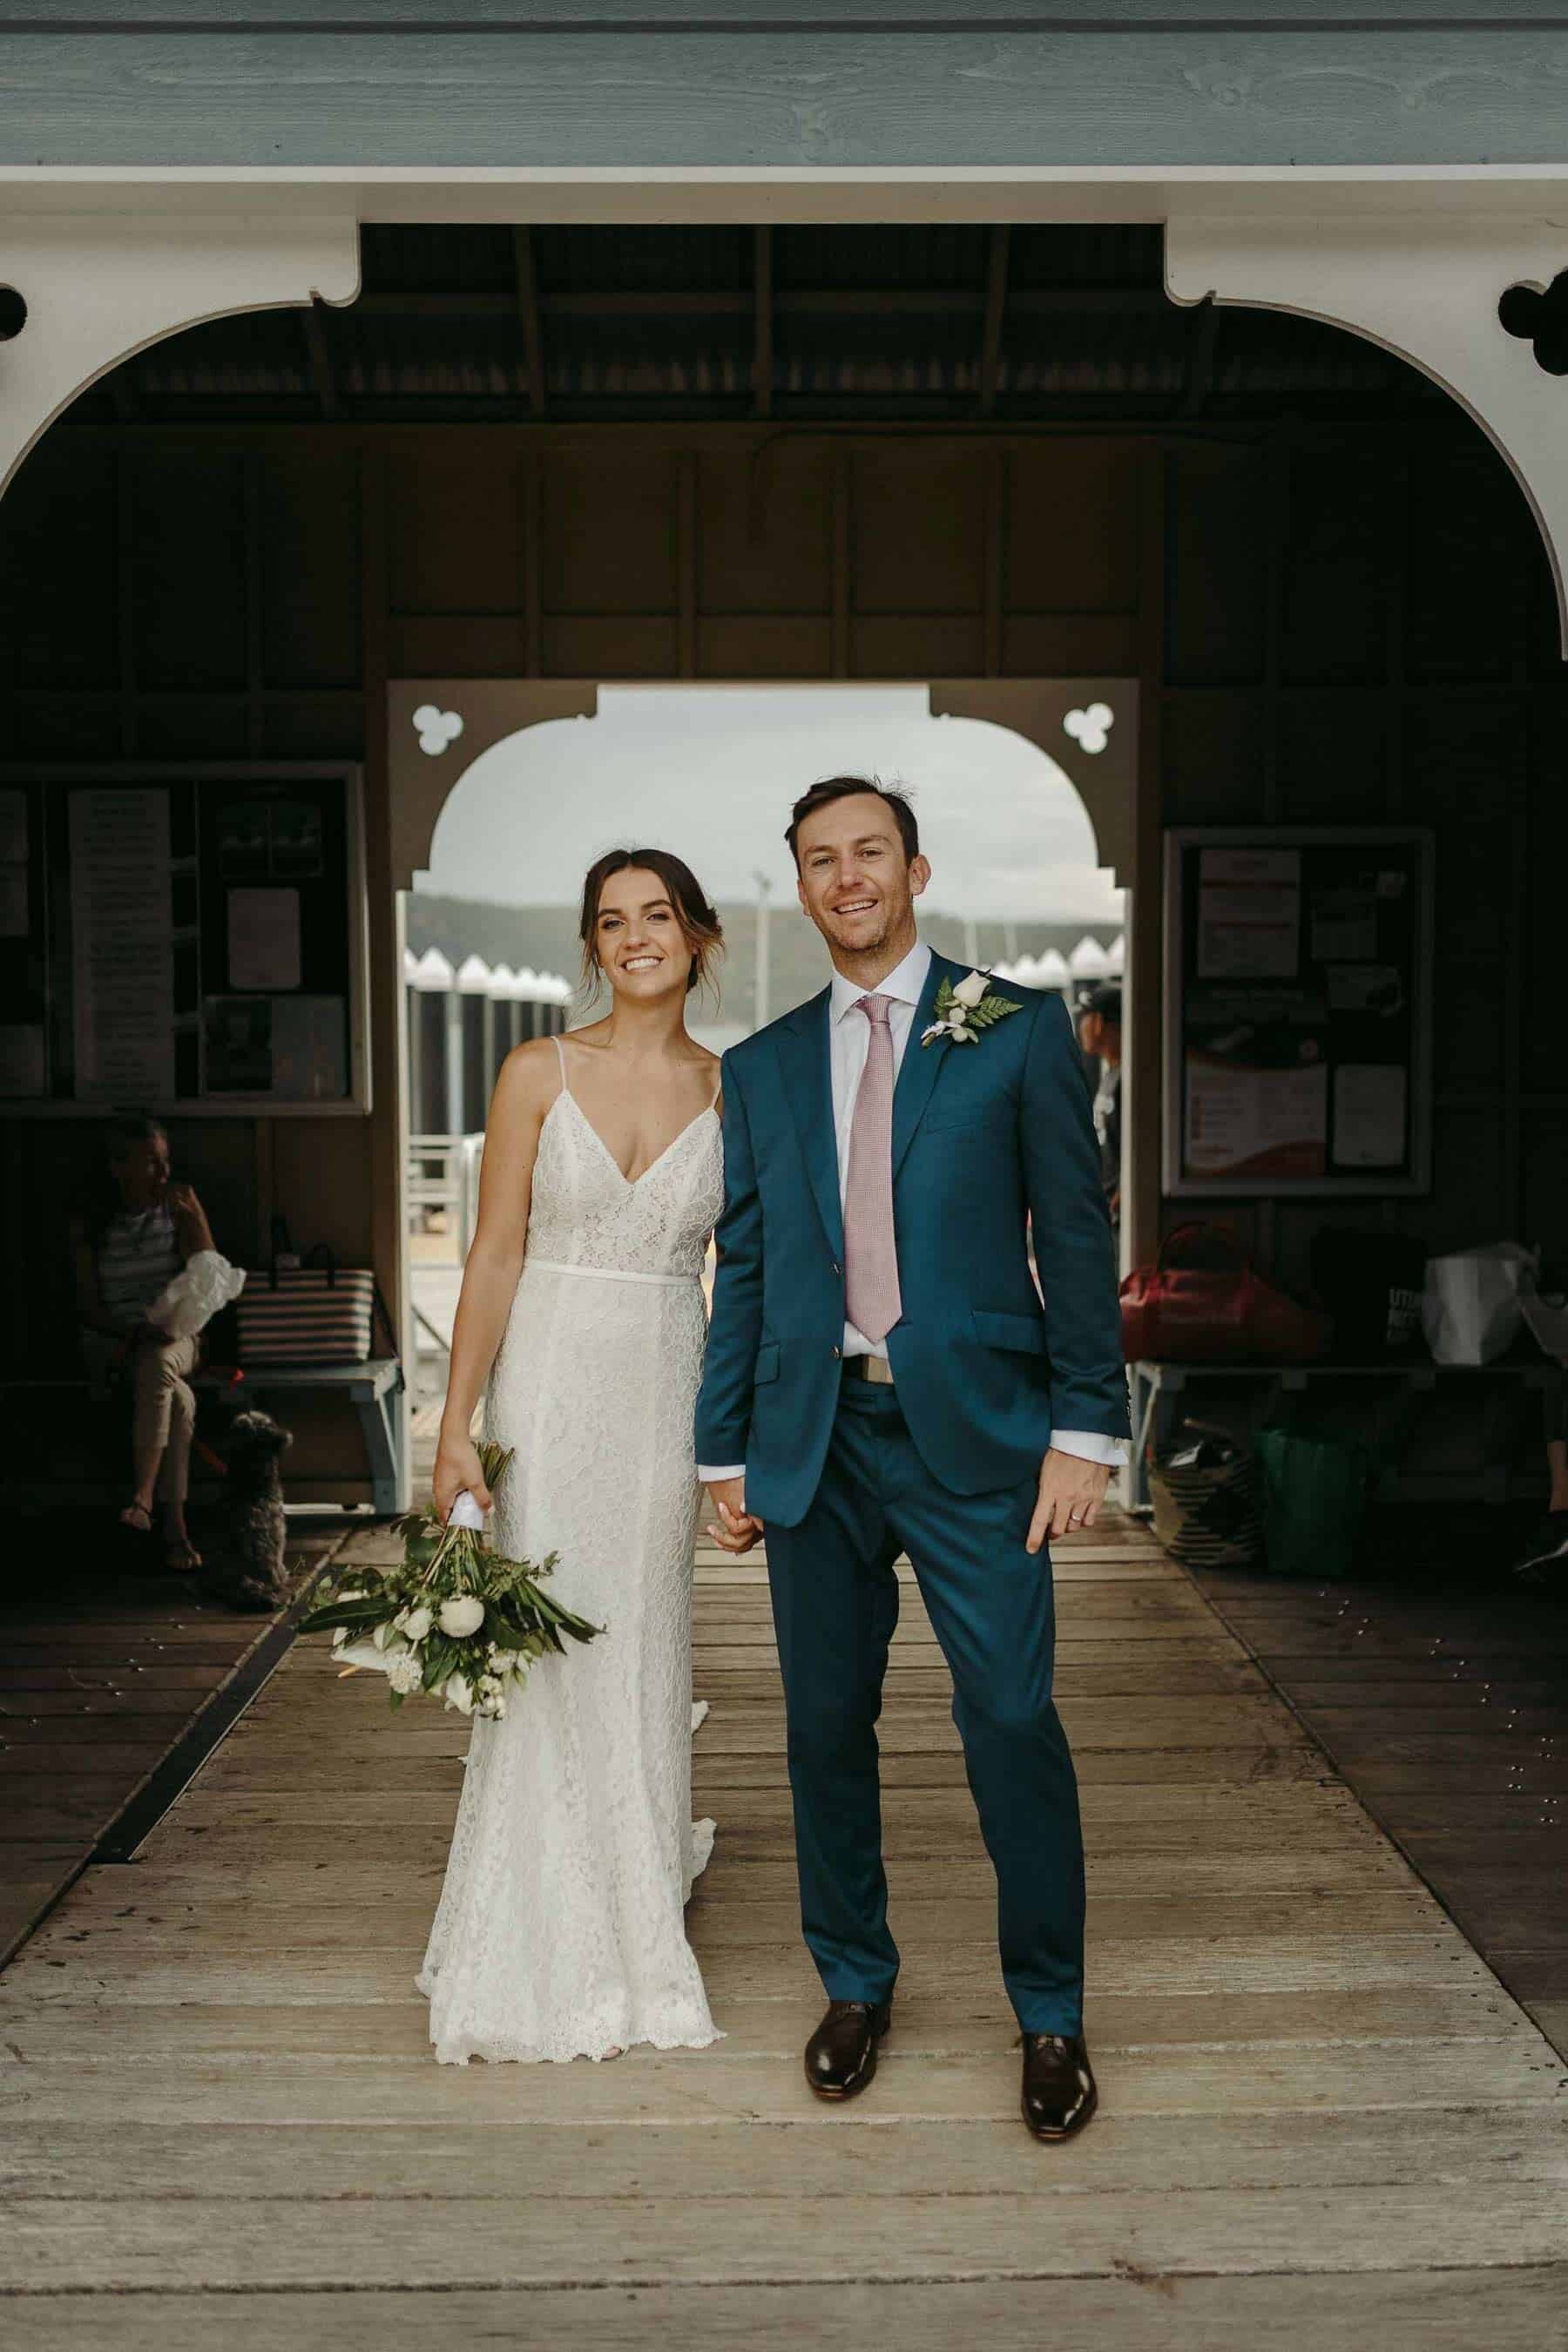 Grace loves lace gown and navy suit at beach wedding